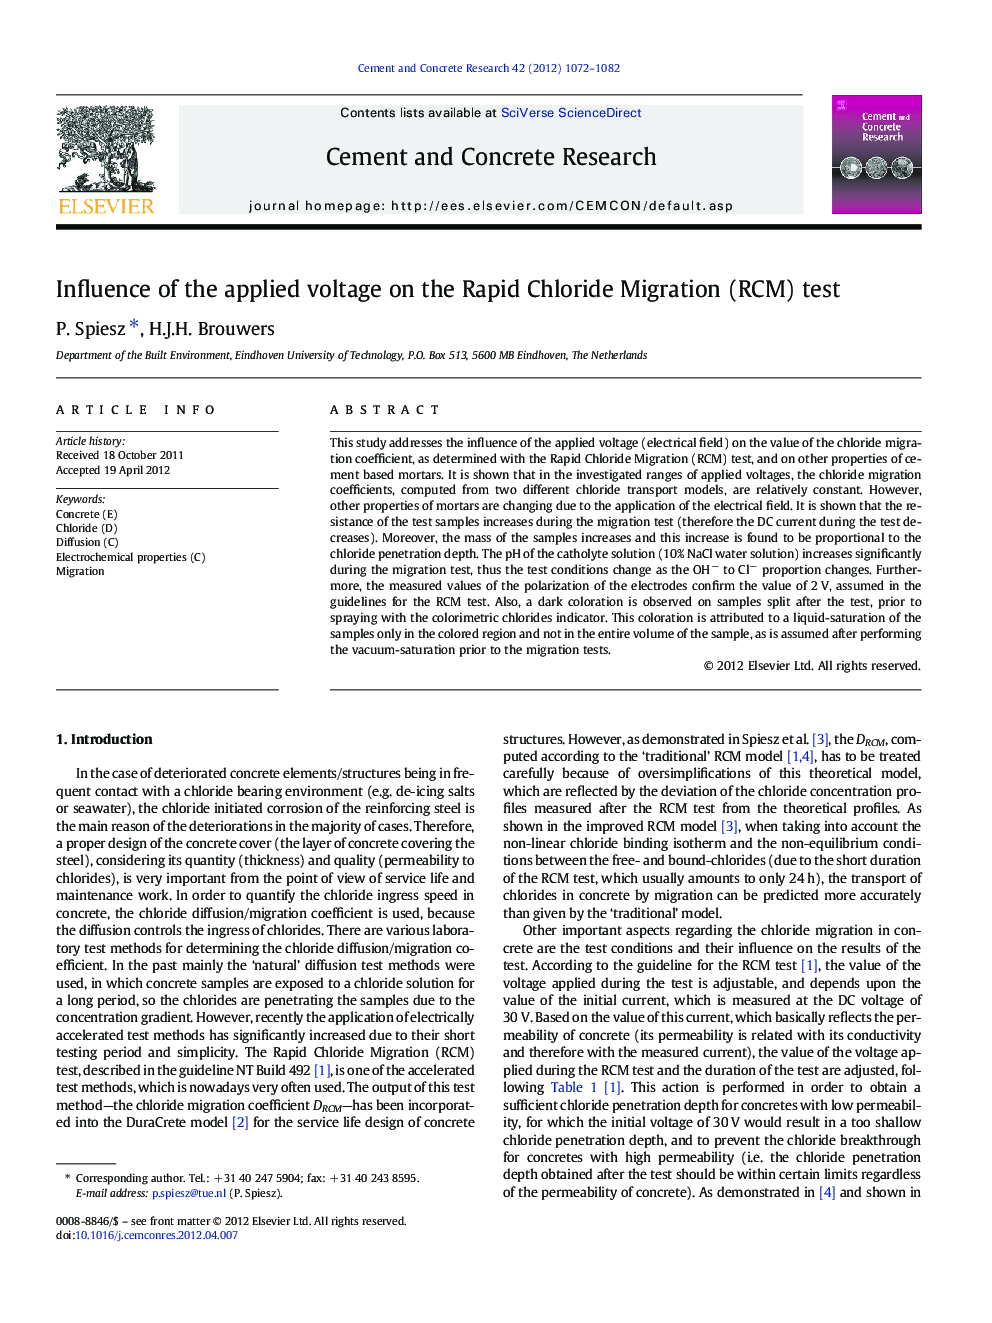 Influence of the applied voltage on the Rapid Chloride Migration (RCM) test